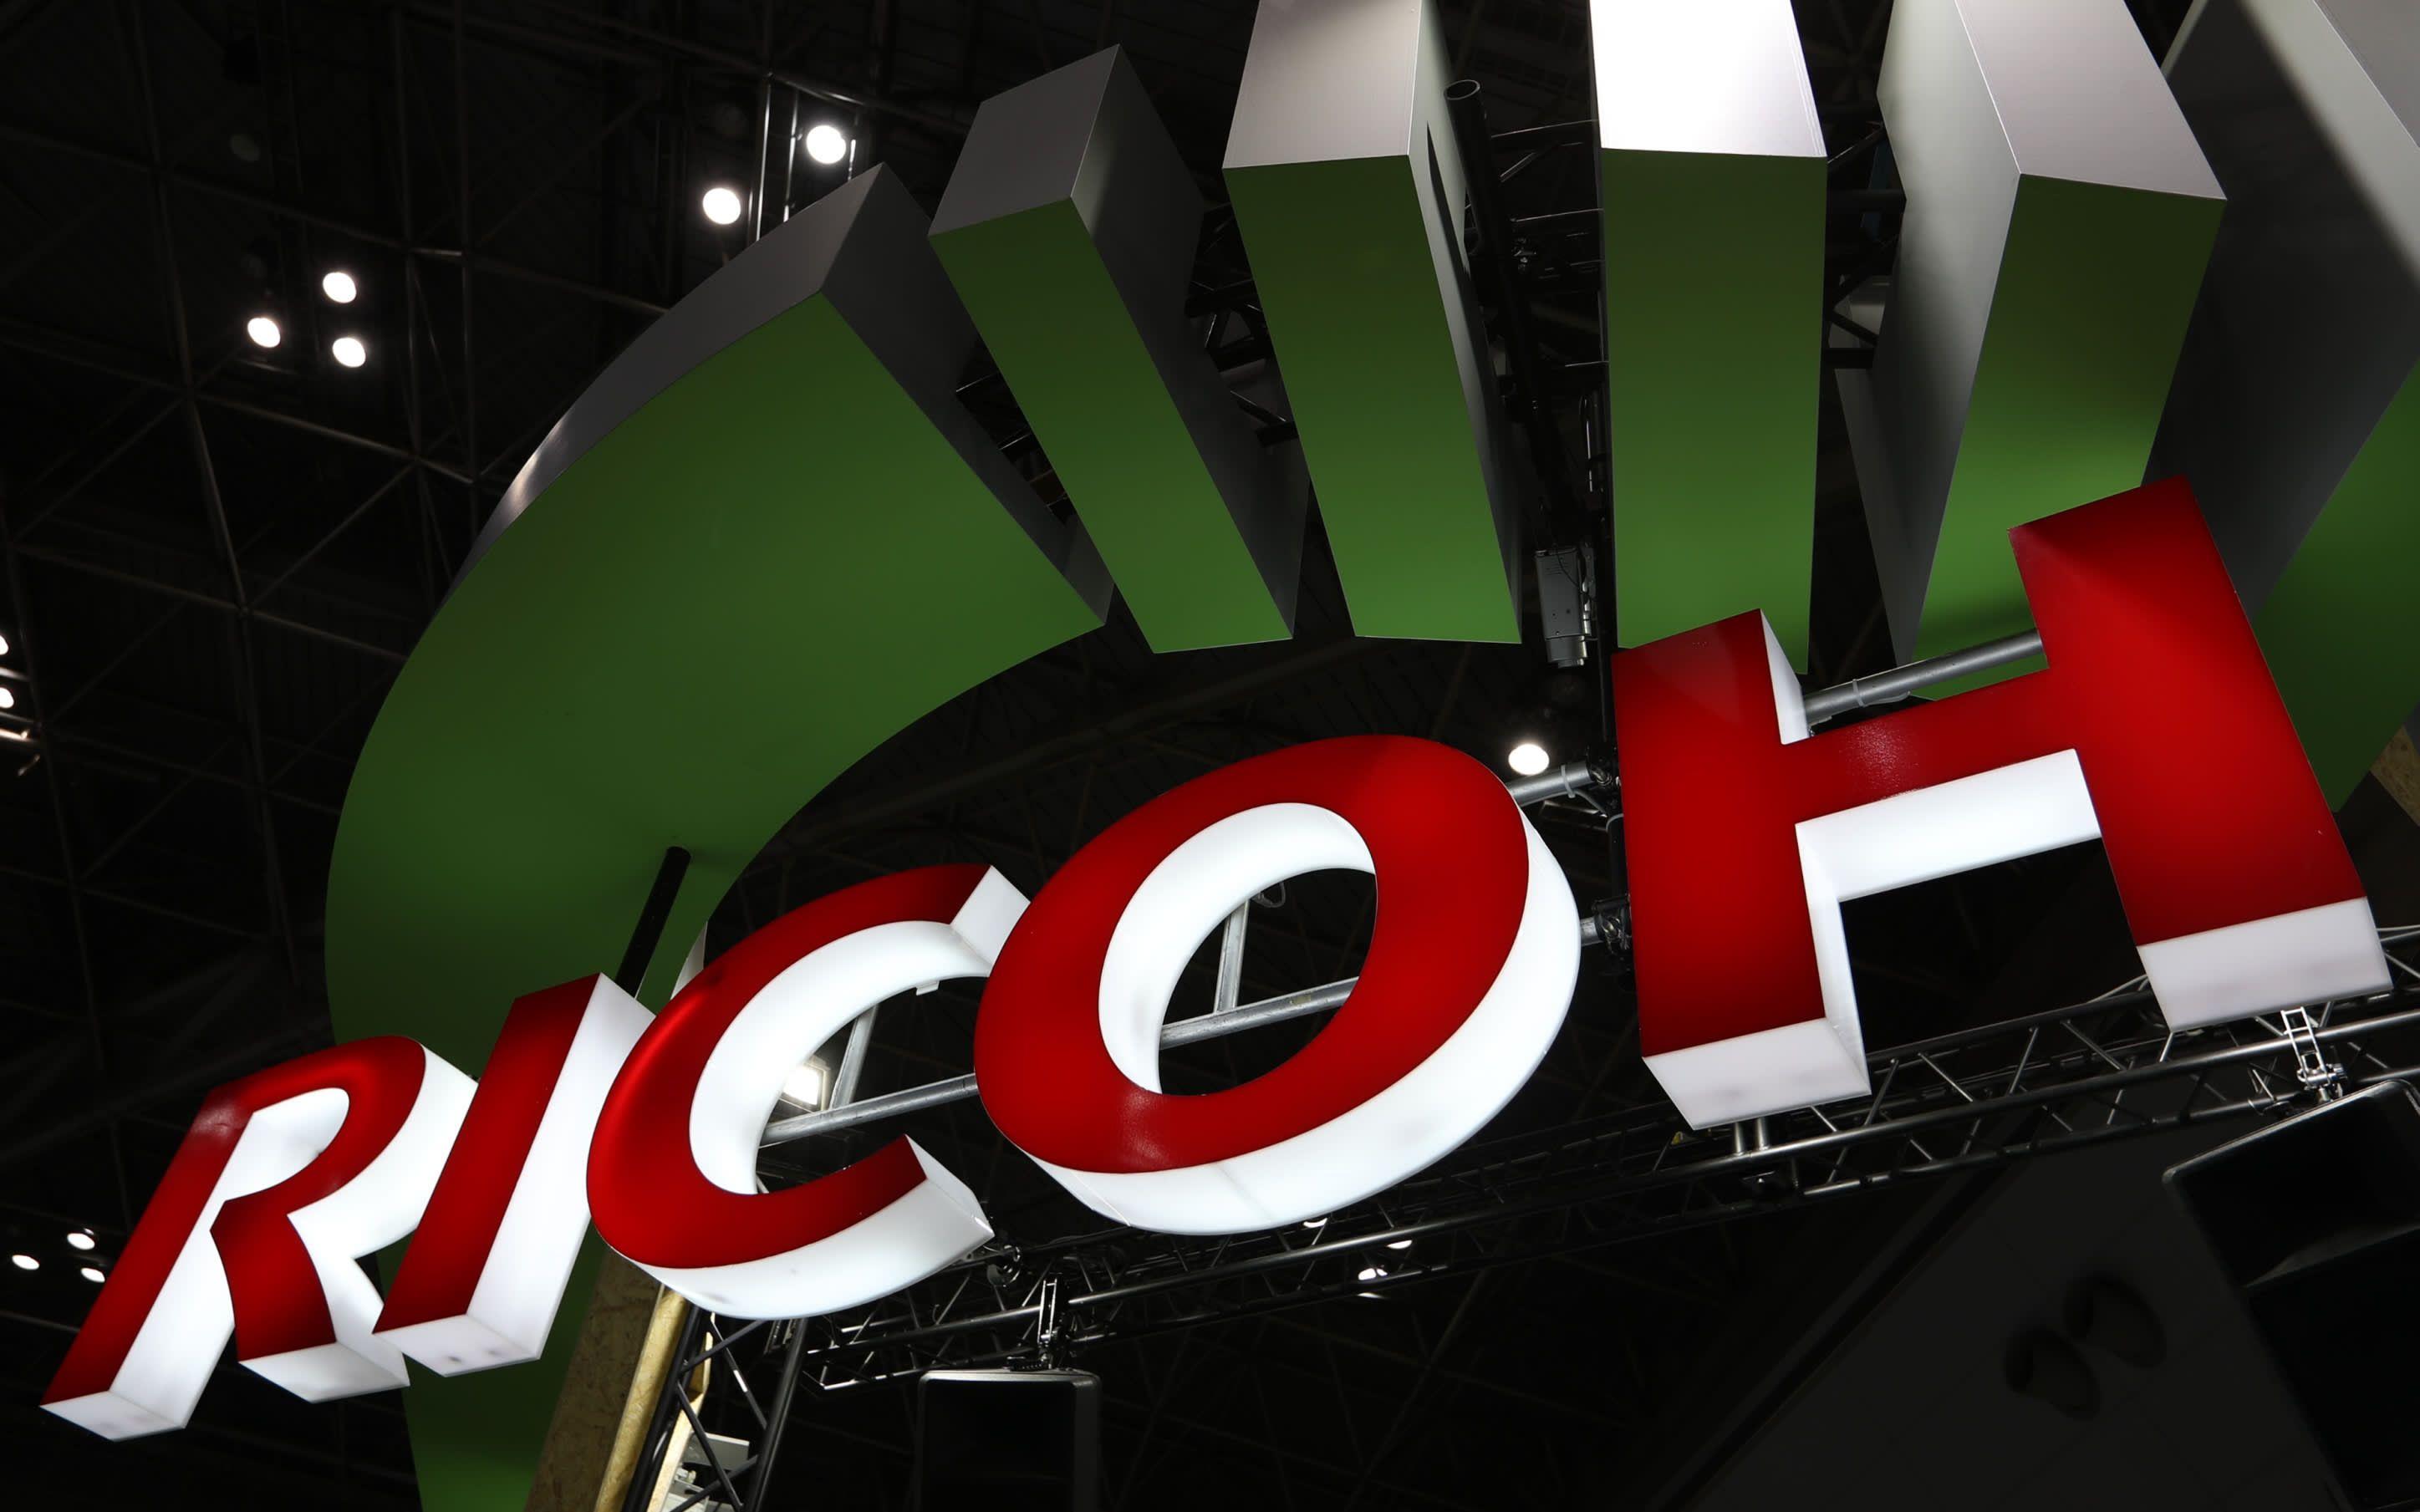 New Ricoh Logo - Ricoh sees profit quintupling in fiscal 2018 - Nikkei Asian Review